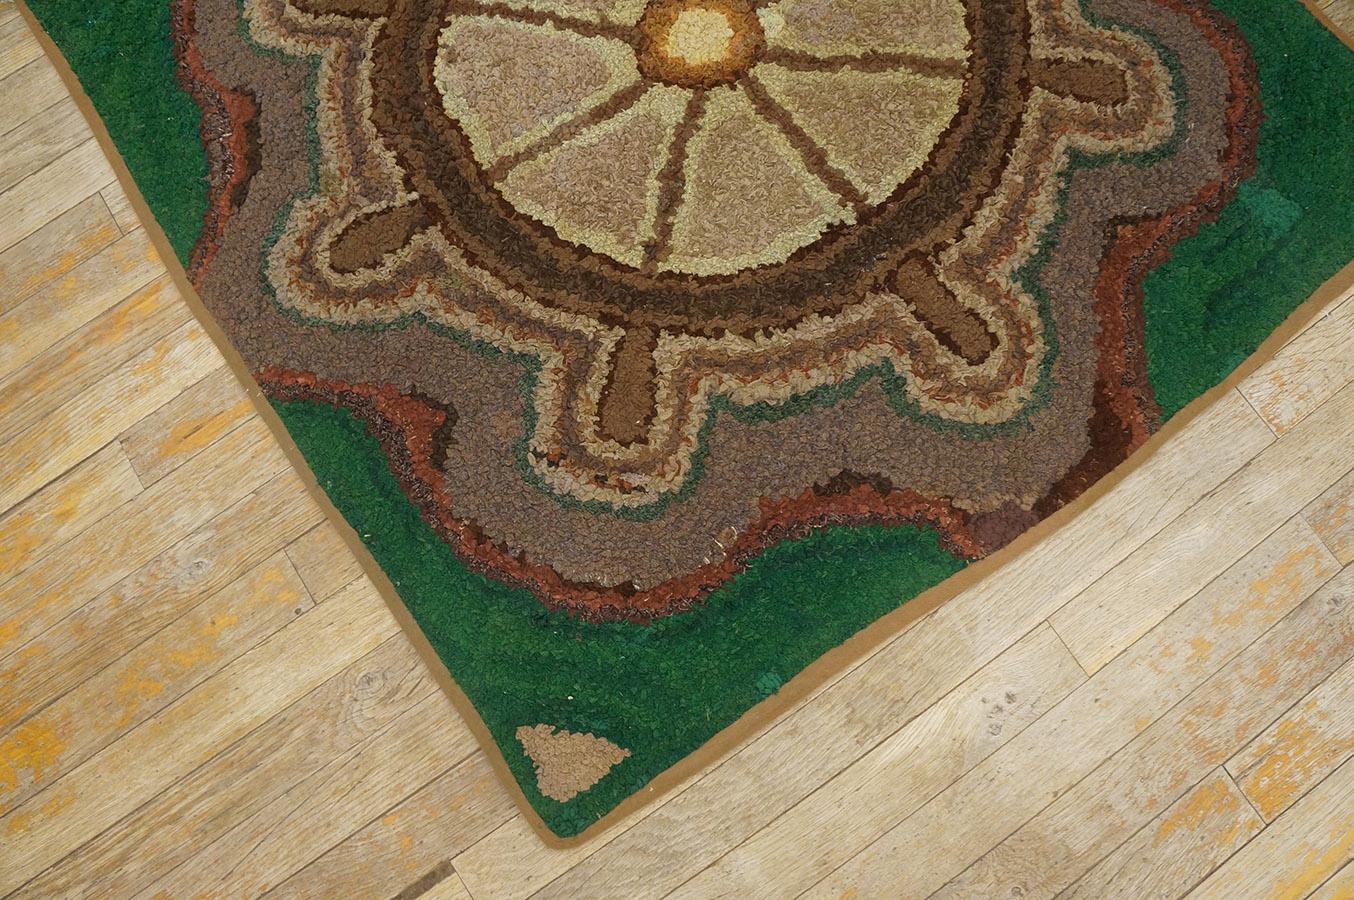 Early 20th Century American Hooked Rug ( 3'4